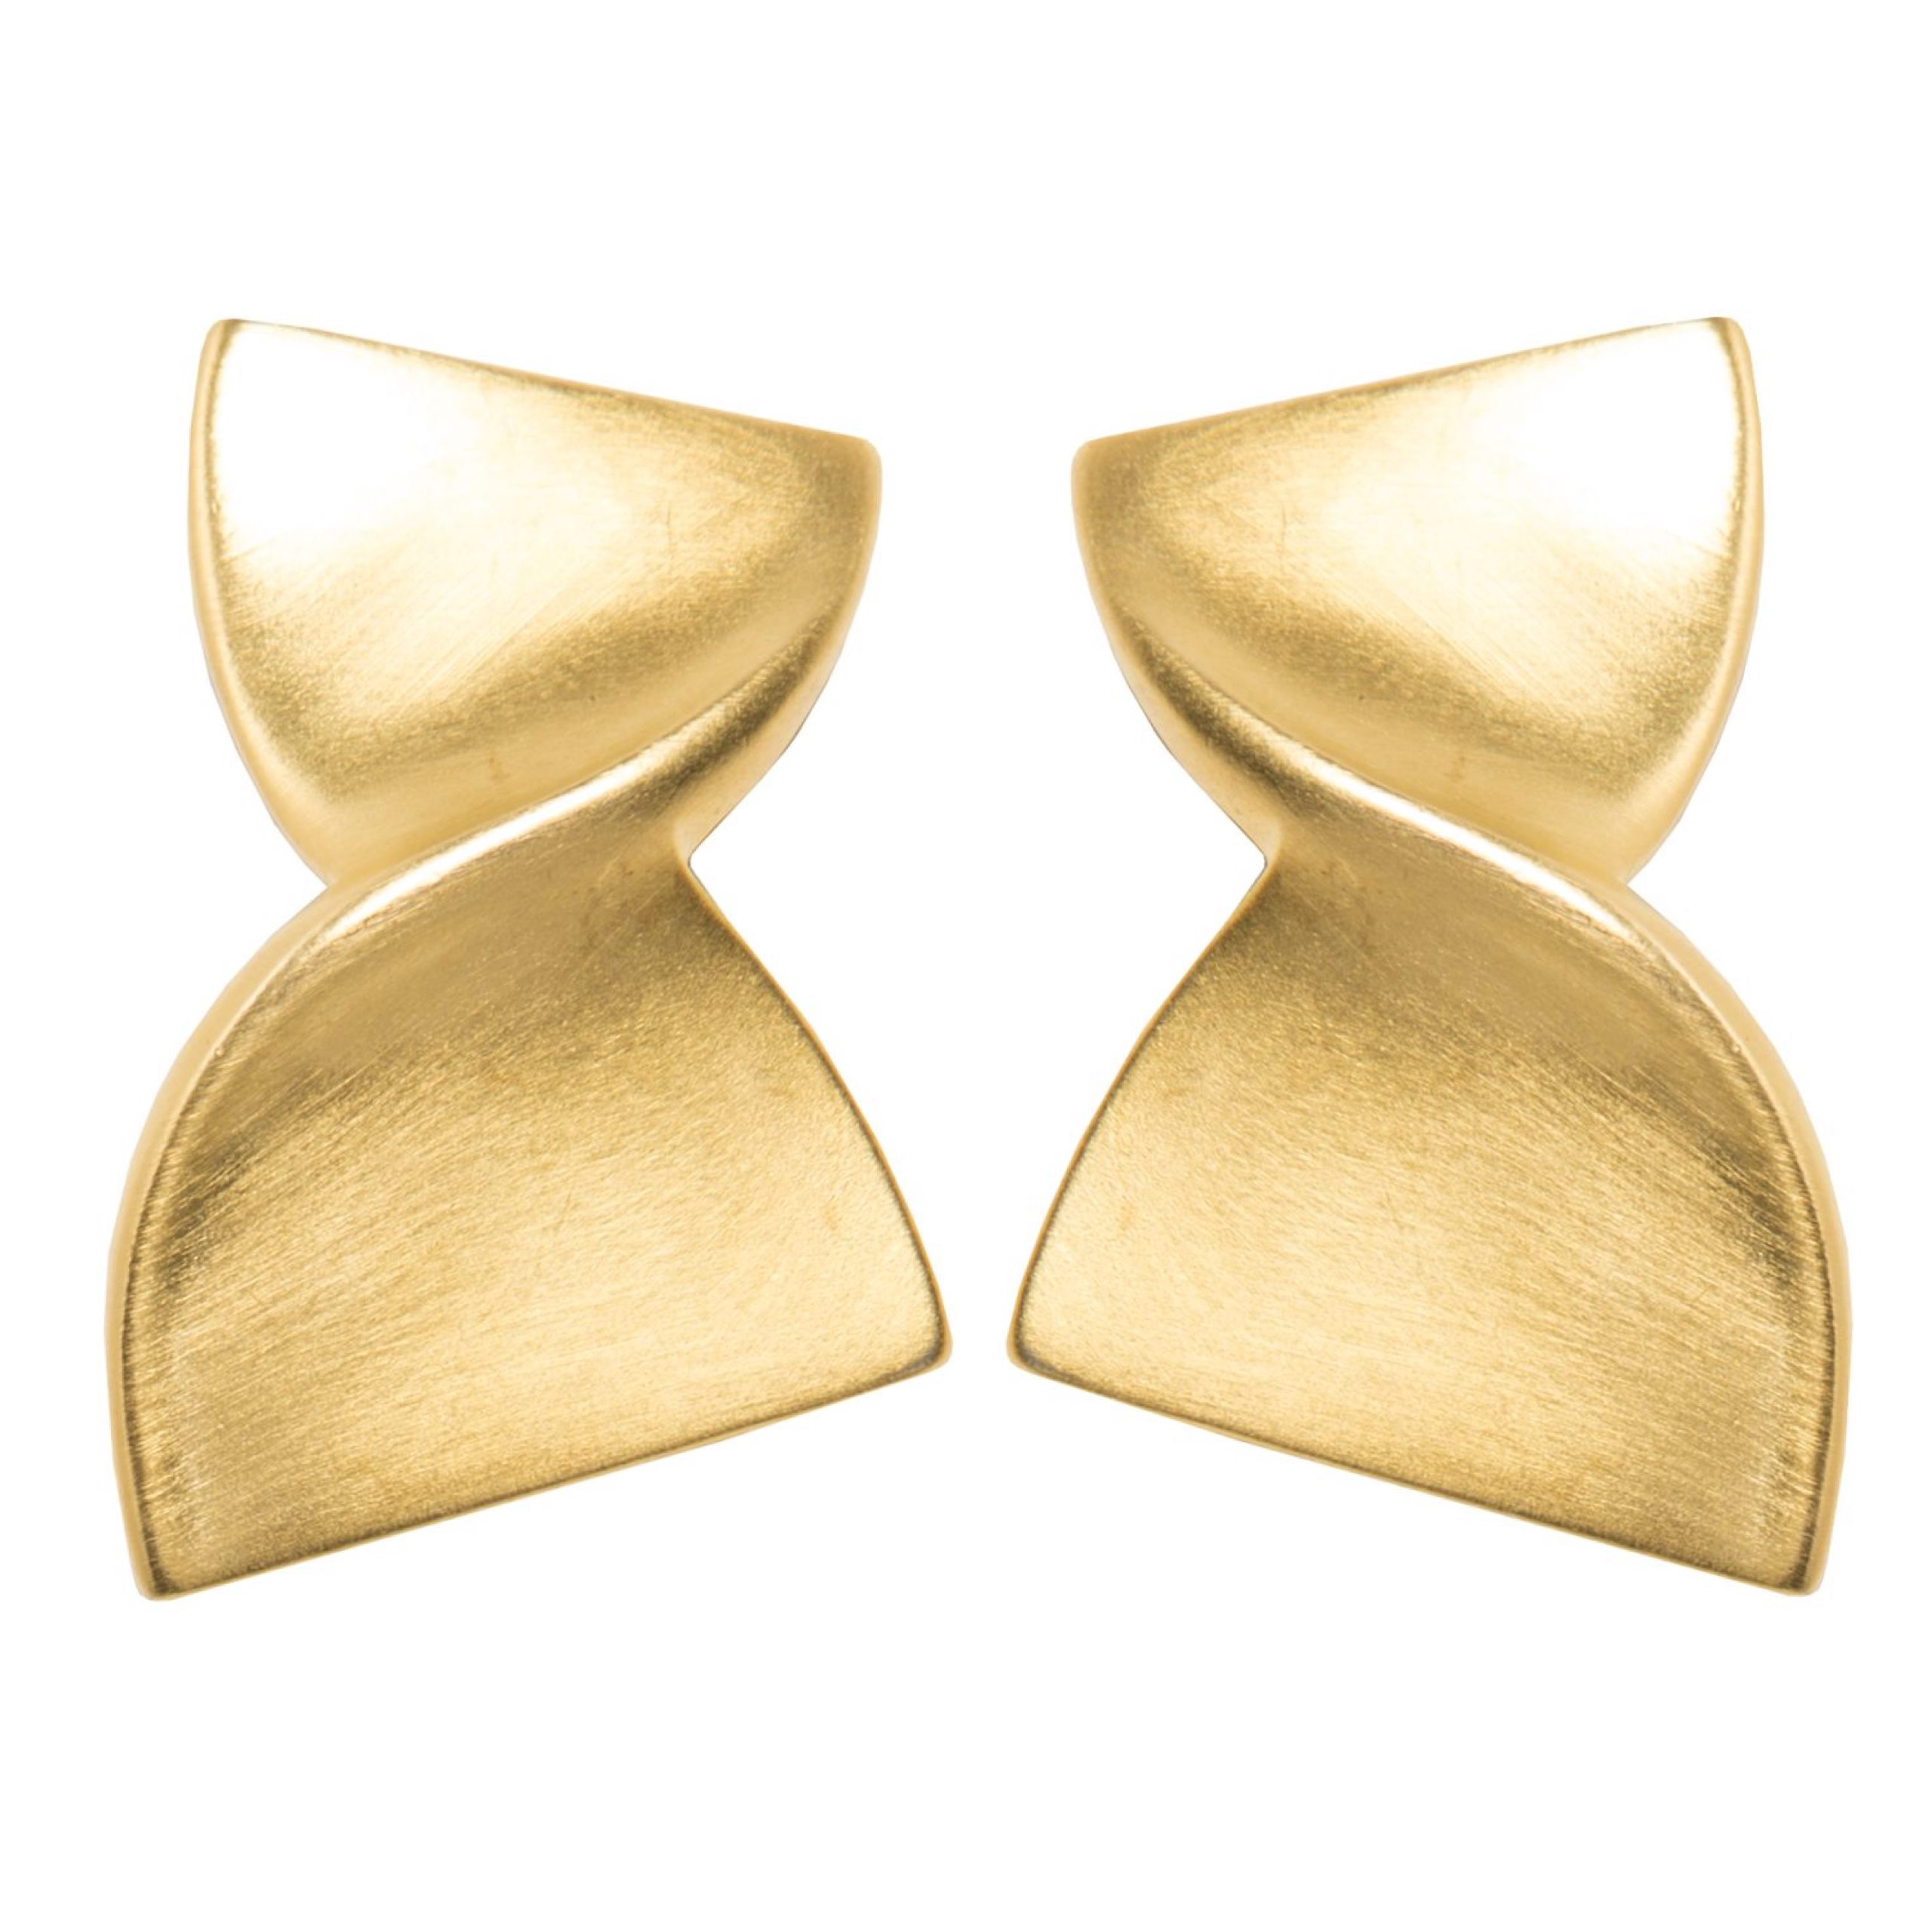 Vintage gold bow earrings